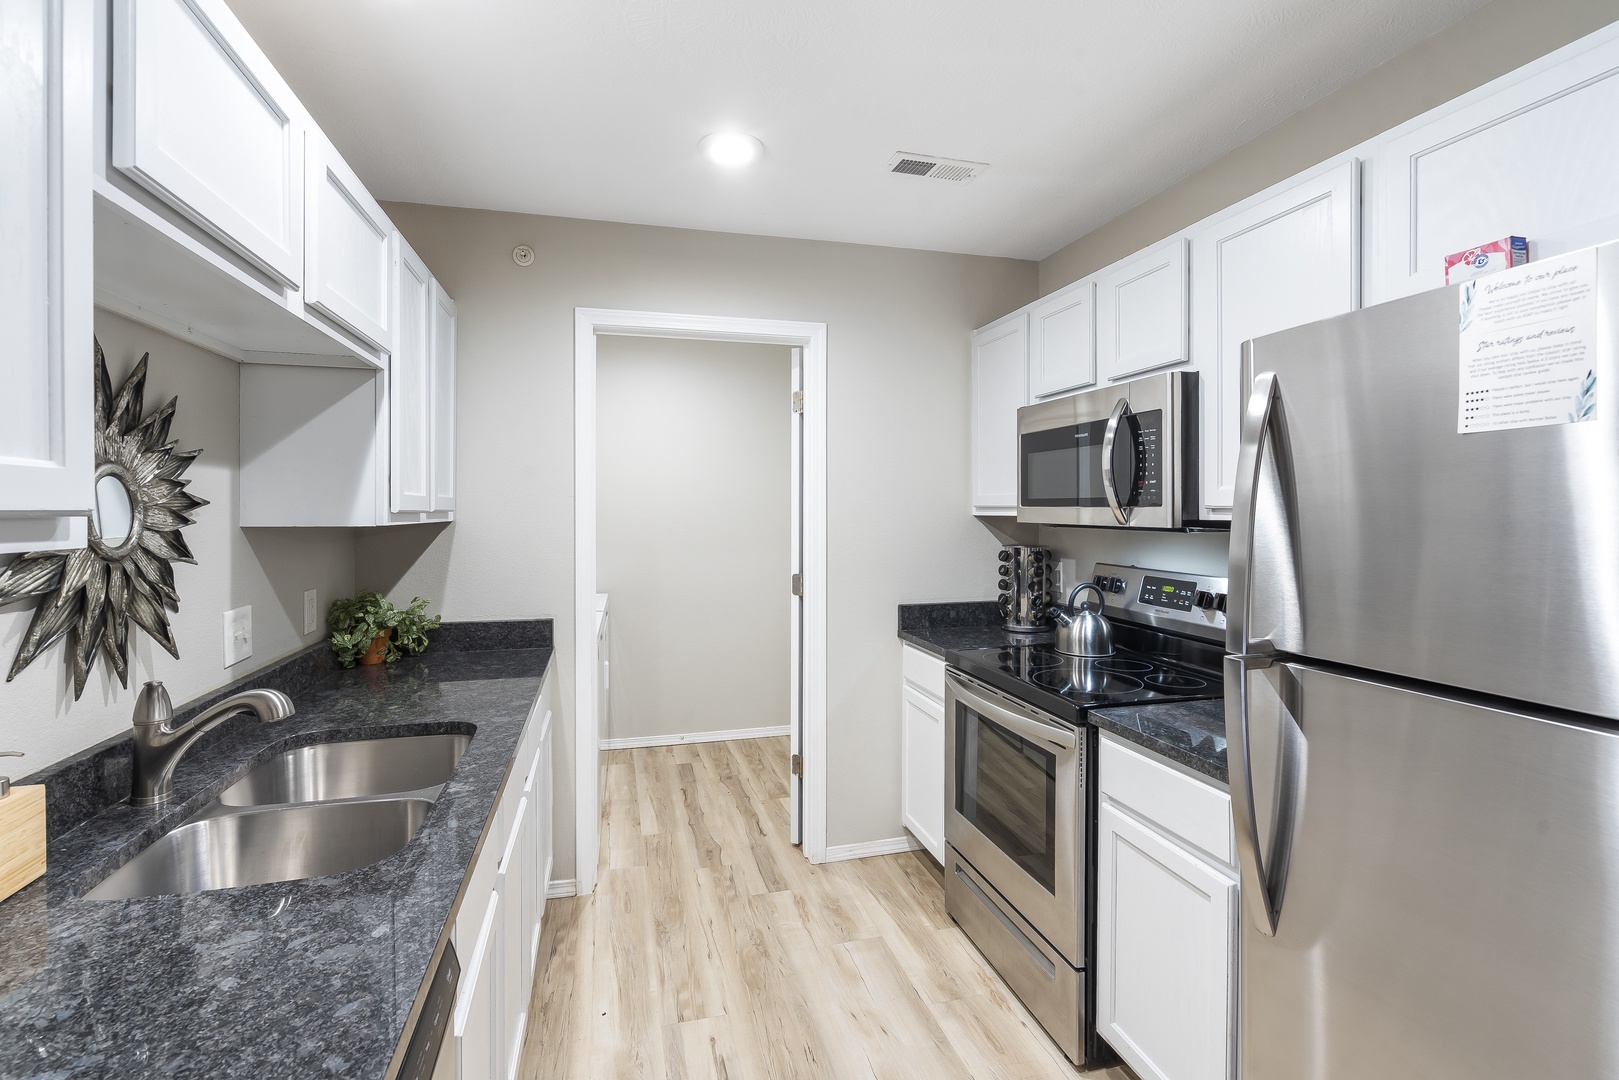 The airy kitchen offers ample space and all the comforts of home